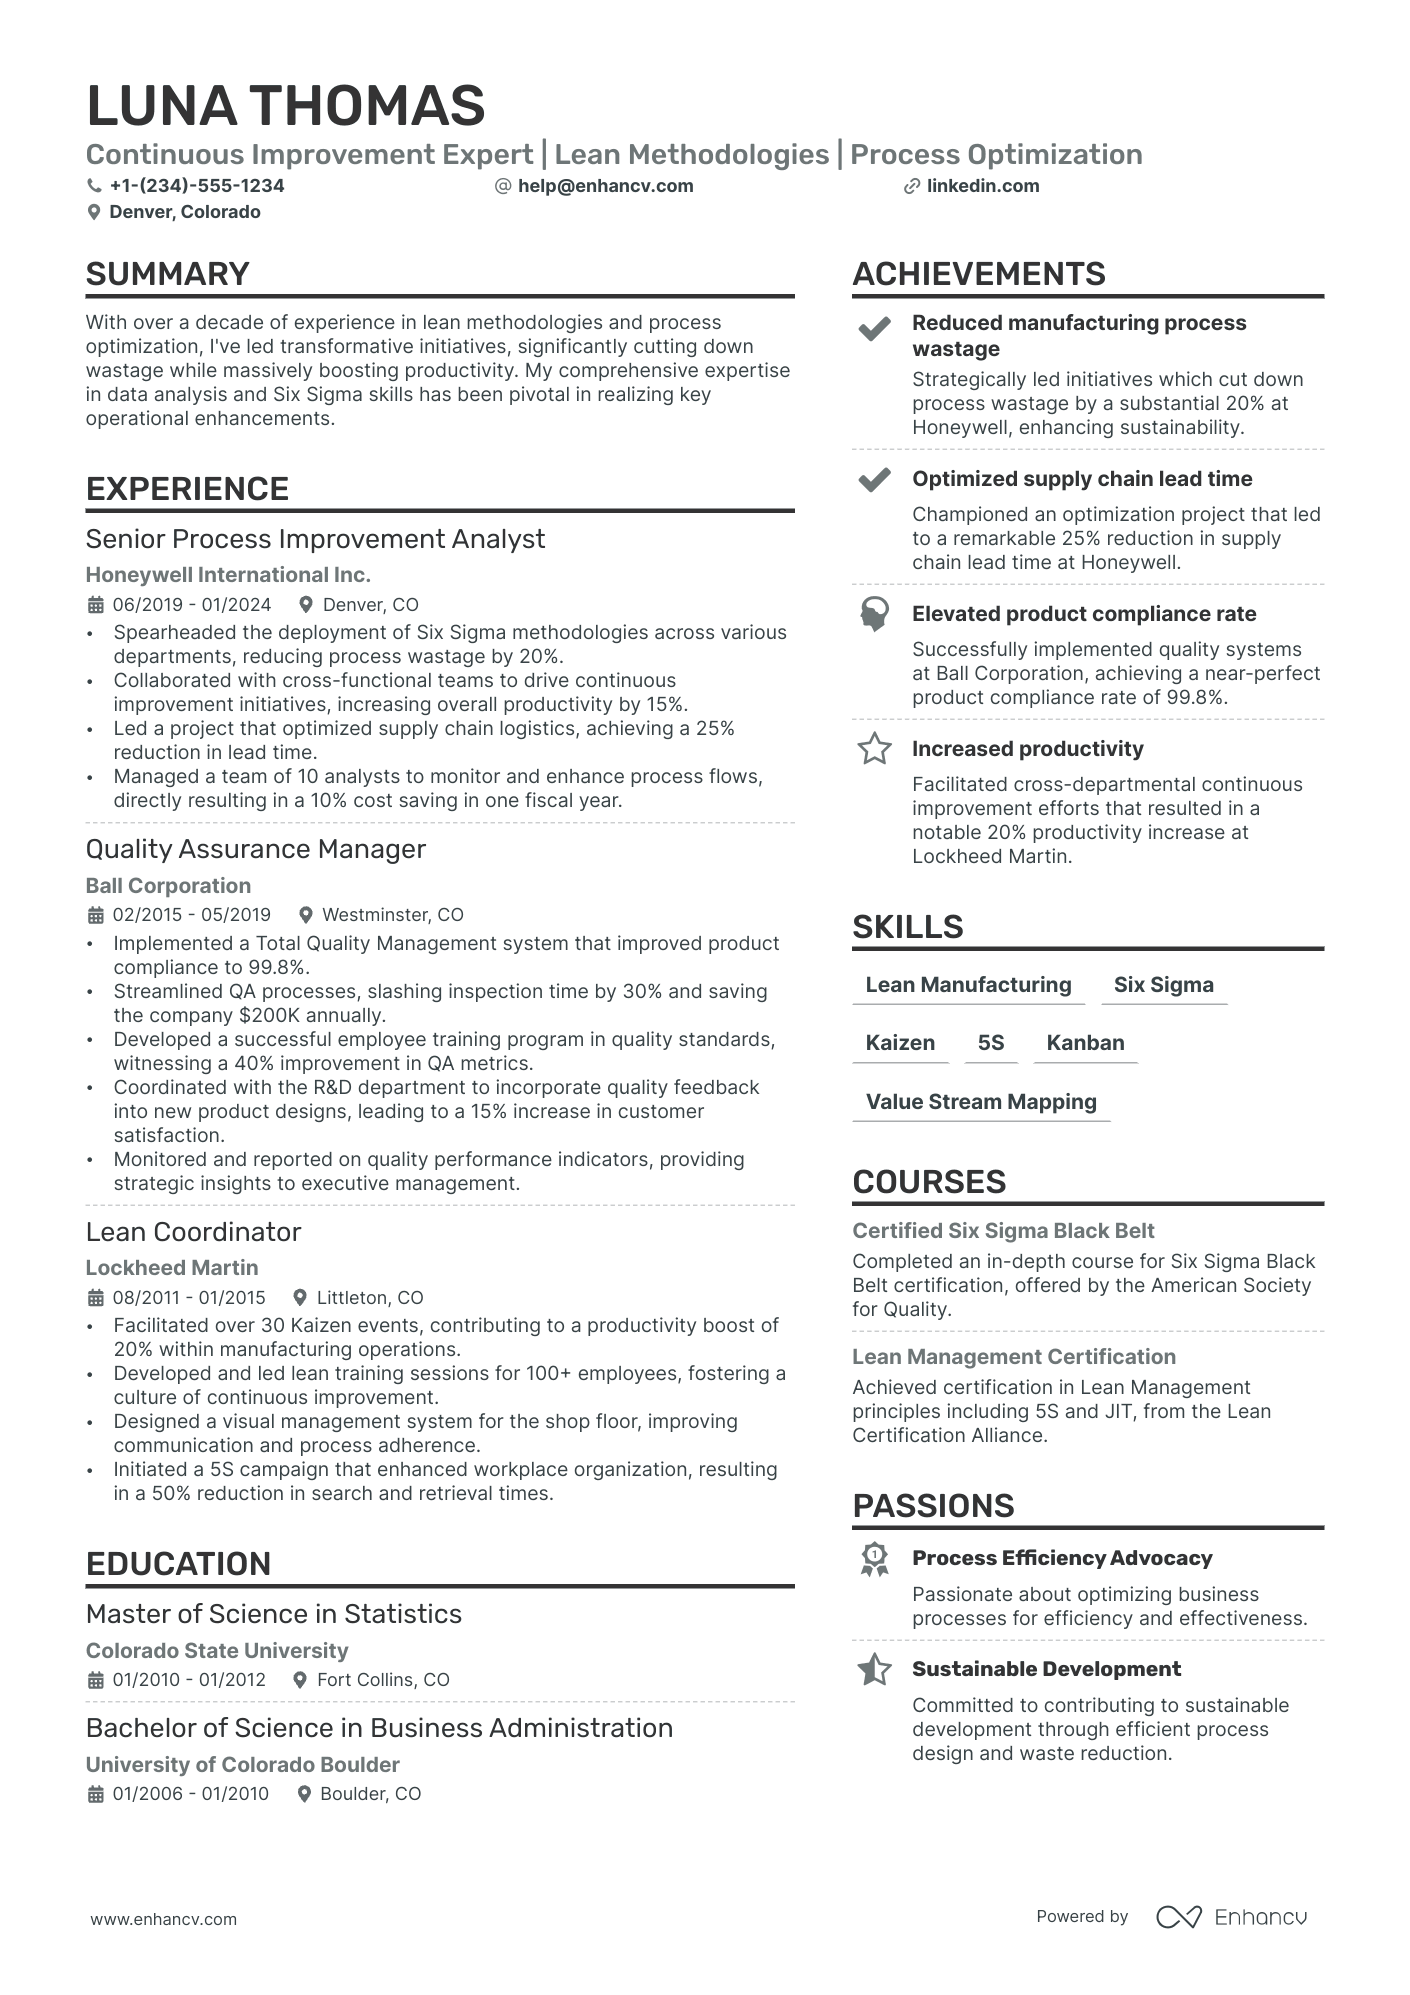 Continuous Improvement Manager resume example